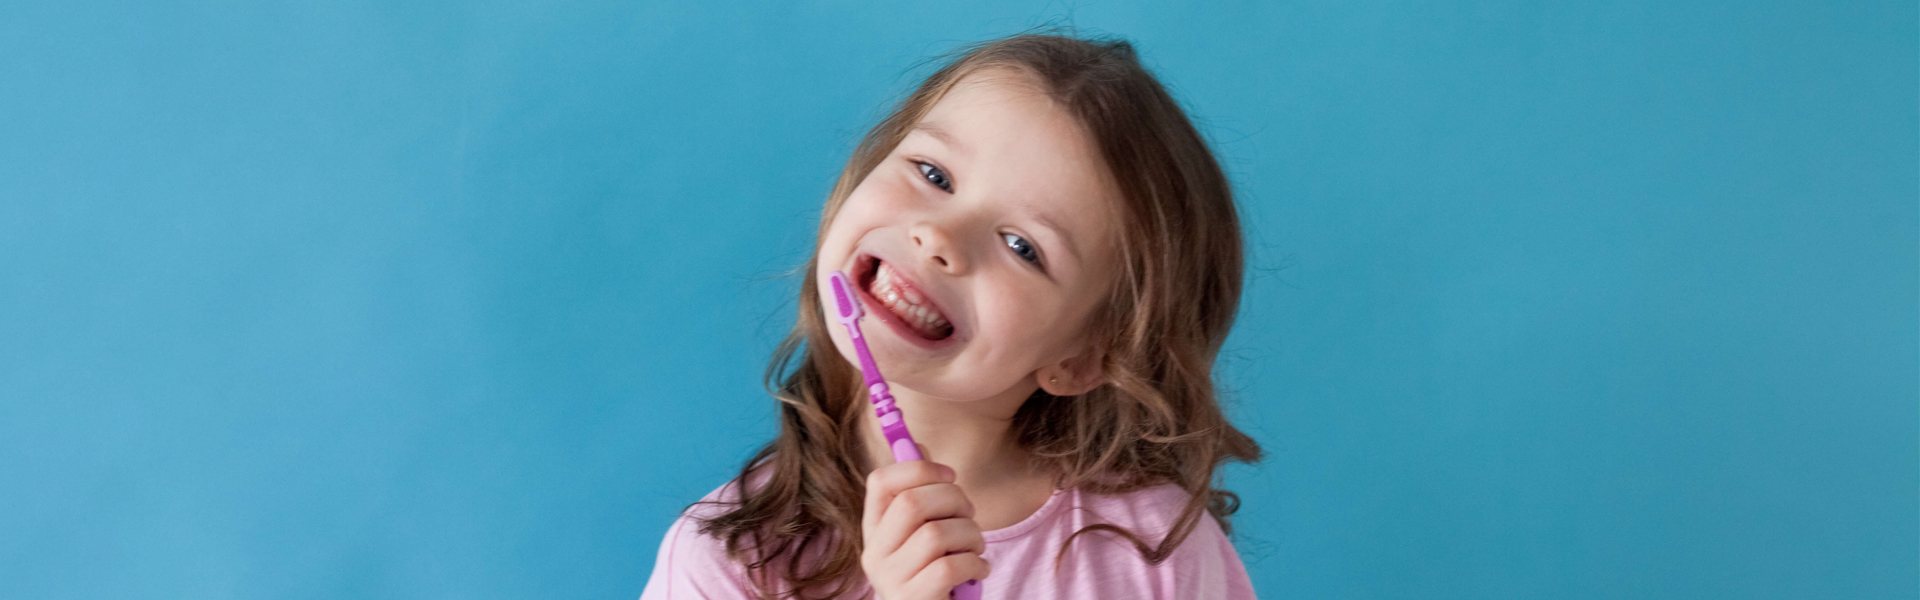 What Are the Benefits of Pediatric Dentistry?